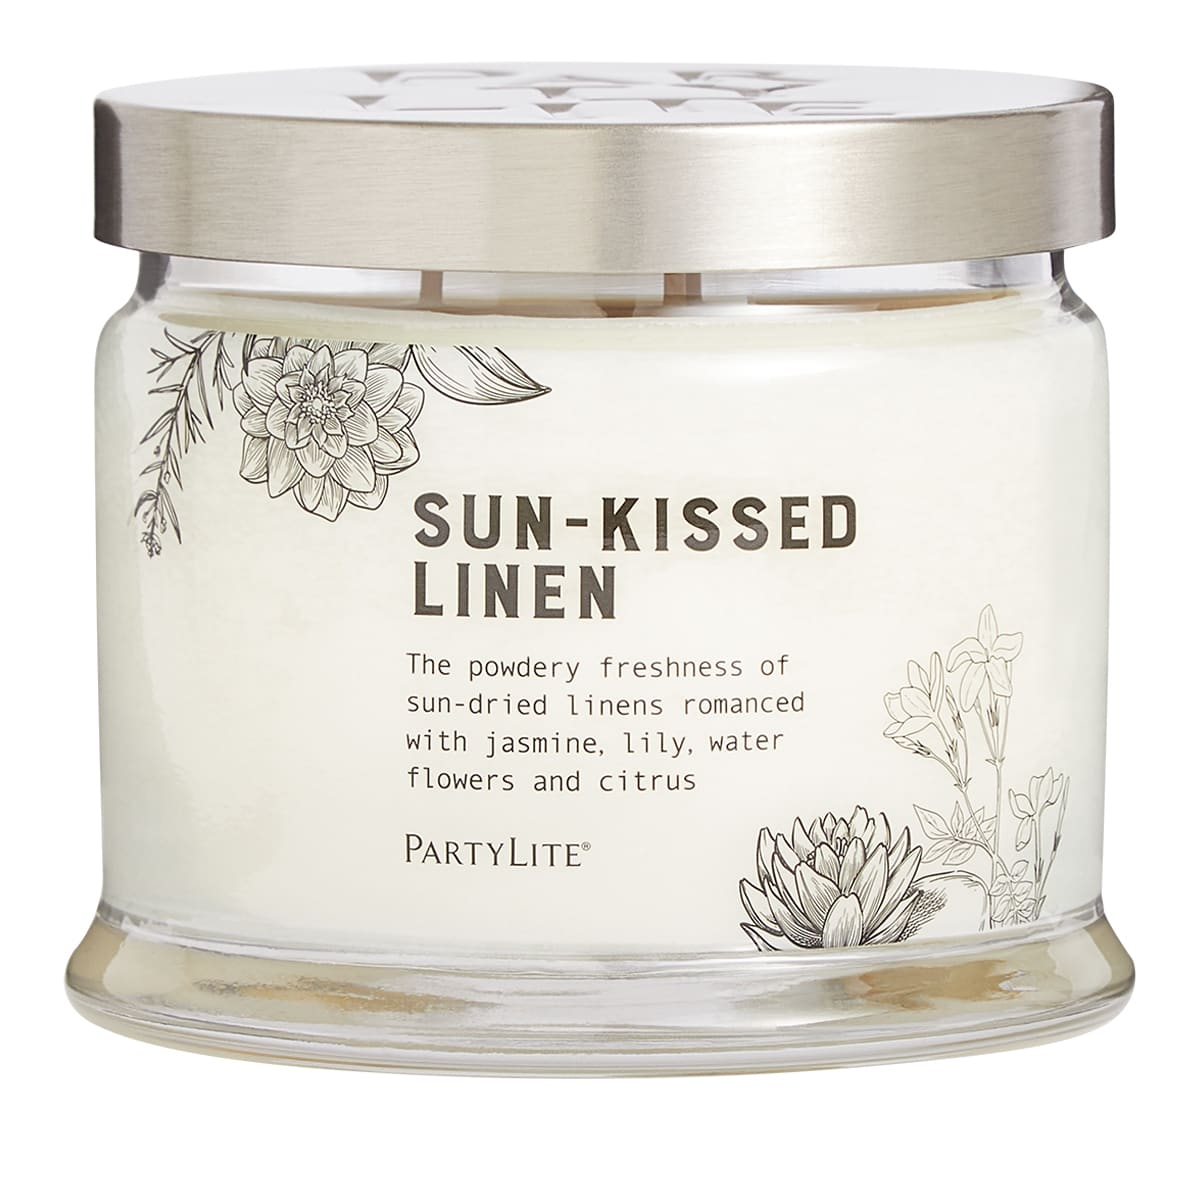 Sun-Kissed Linen 3-Wick Jar Candle